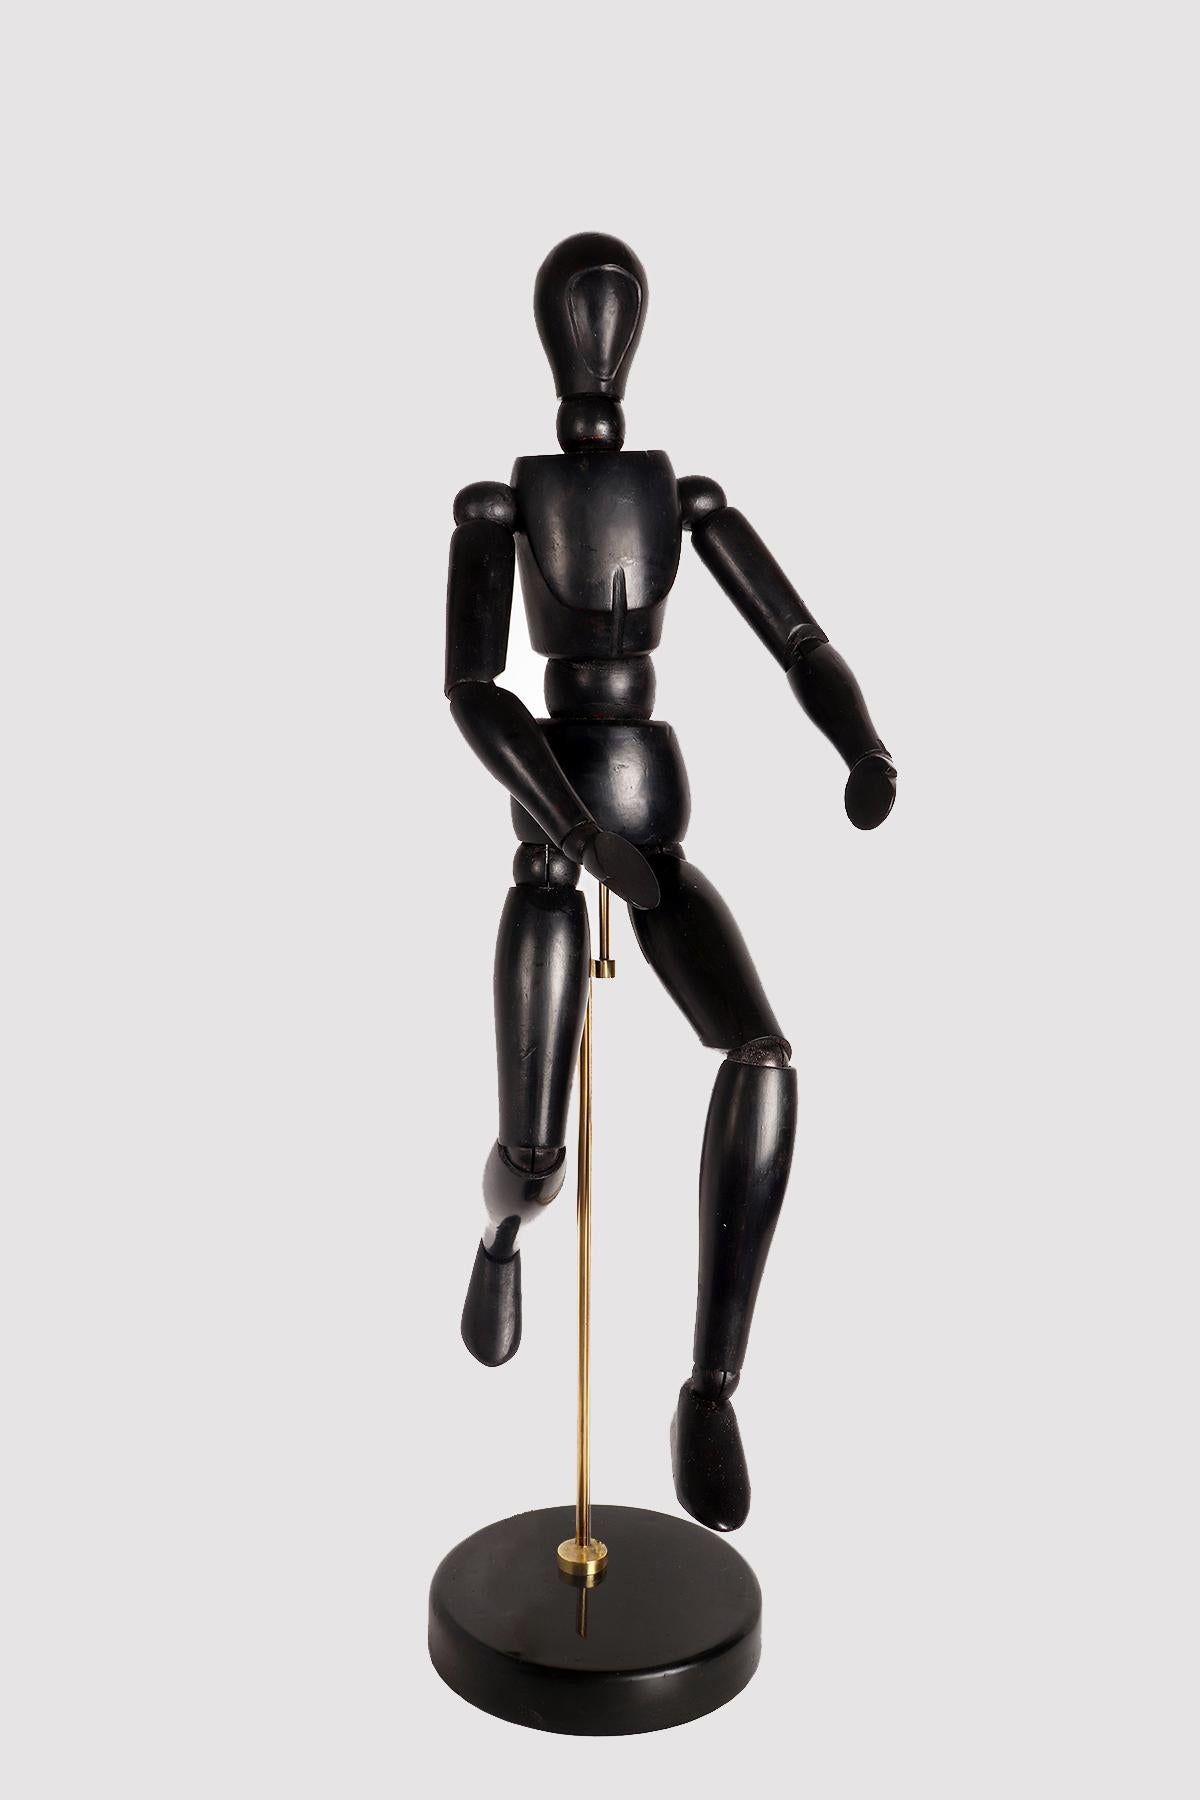 An articulated painter's mannequin of medium size, with a metaphysical face. The mannequin is made of carved and ebonized oak wood. The support is in brass and the base, also made in a round shape in ebonized oak wood. France, circa 1920.
(The